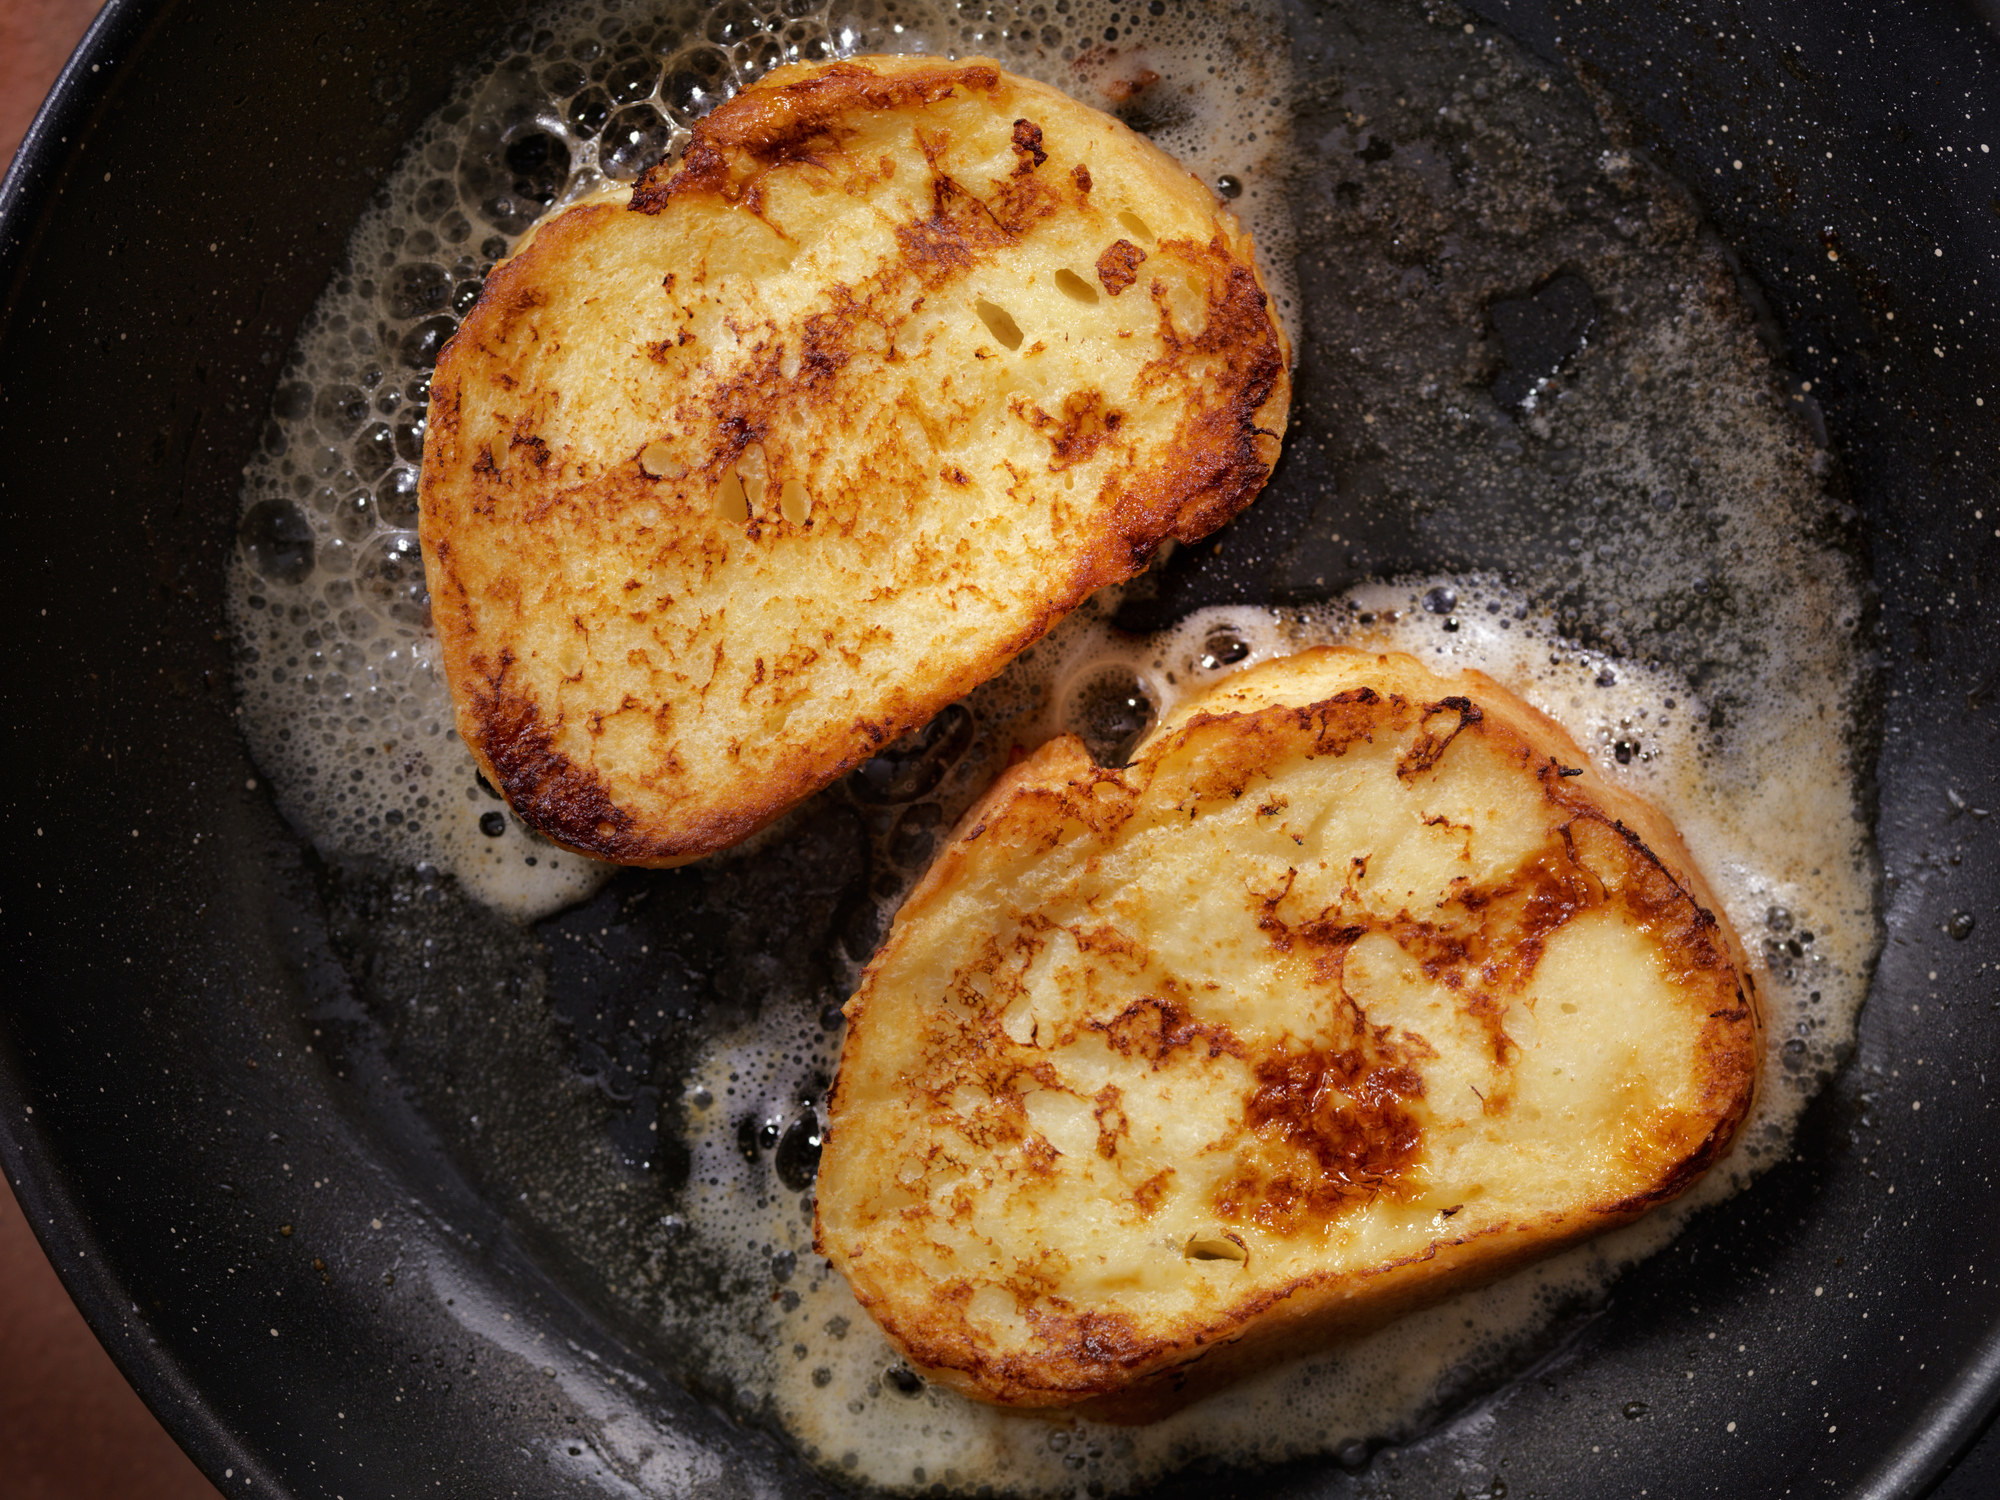 Frying French toast in butter